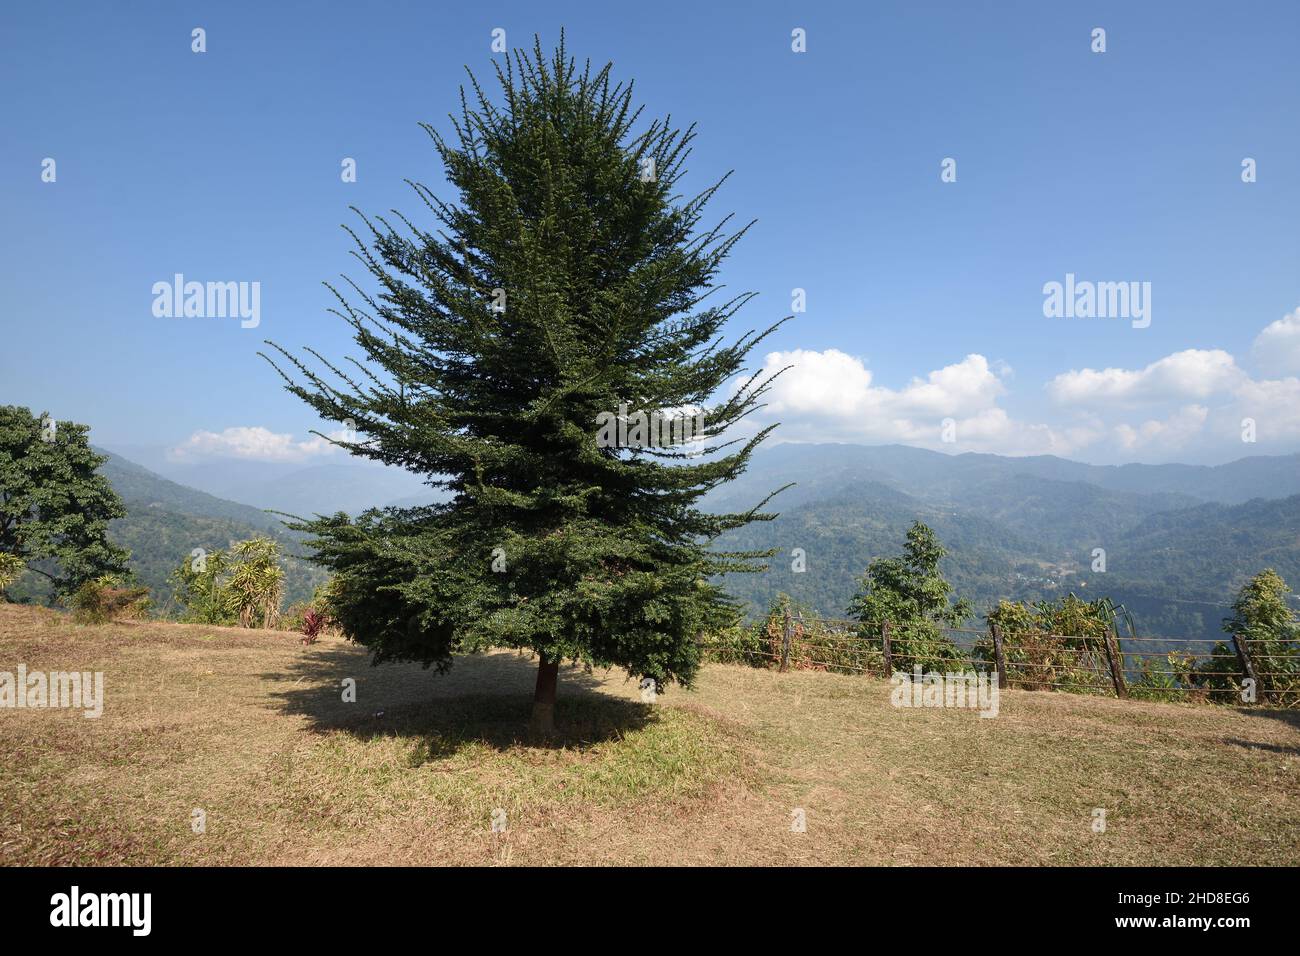 Coniferous tree. Dalgaon view point (altitude 2500 ft). Kalimpong, West Bengal, India. Stock Photo